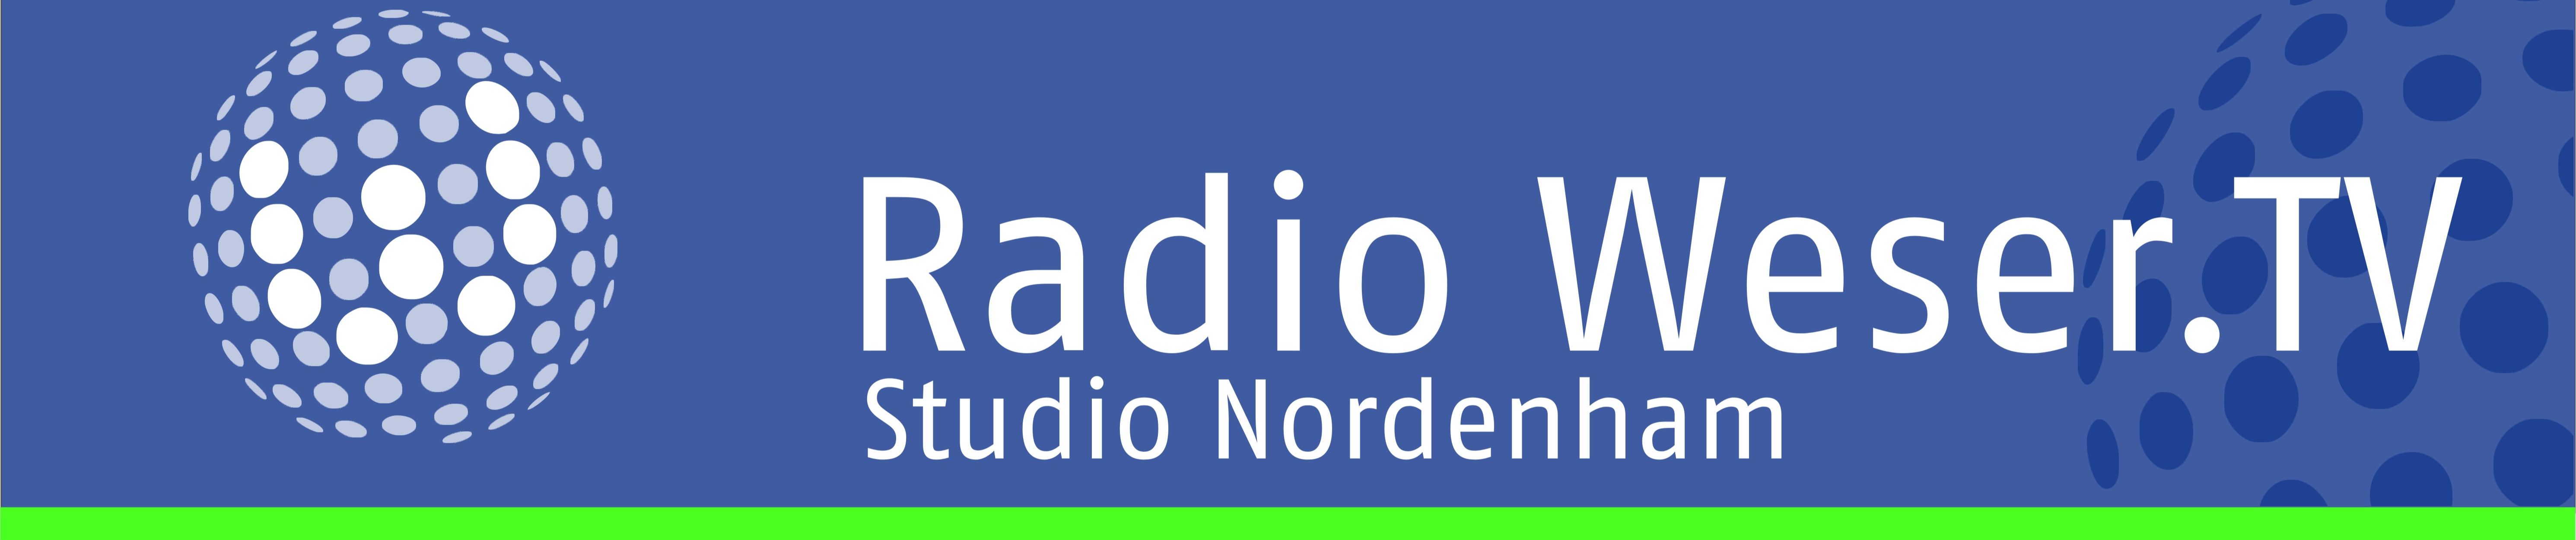 Stream Radio Weser.TV music | Listen to songs, albums, playlists for free  on SoundCloud